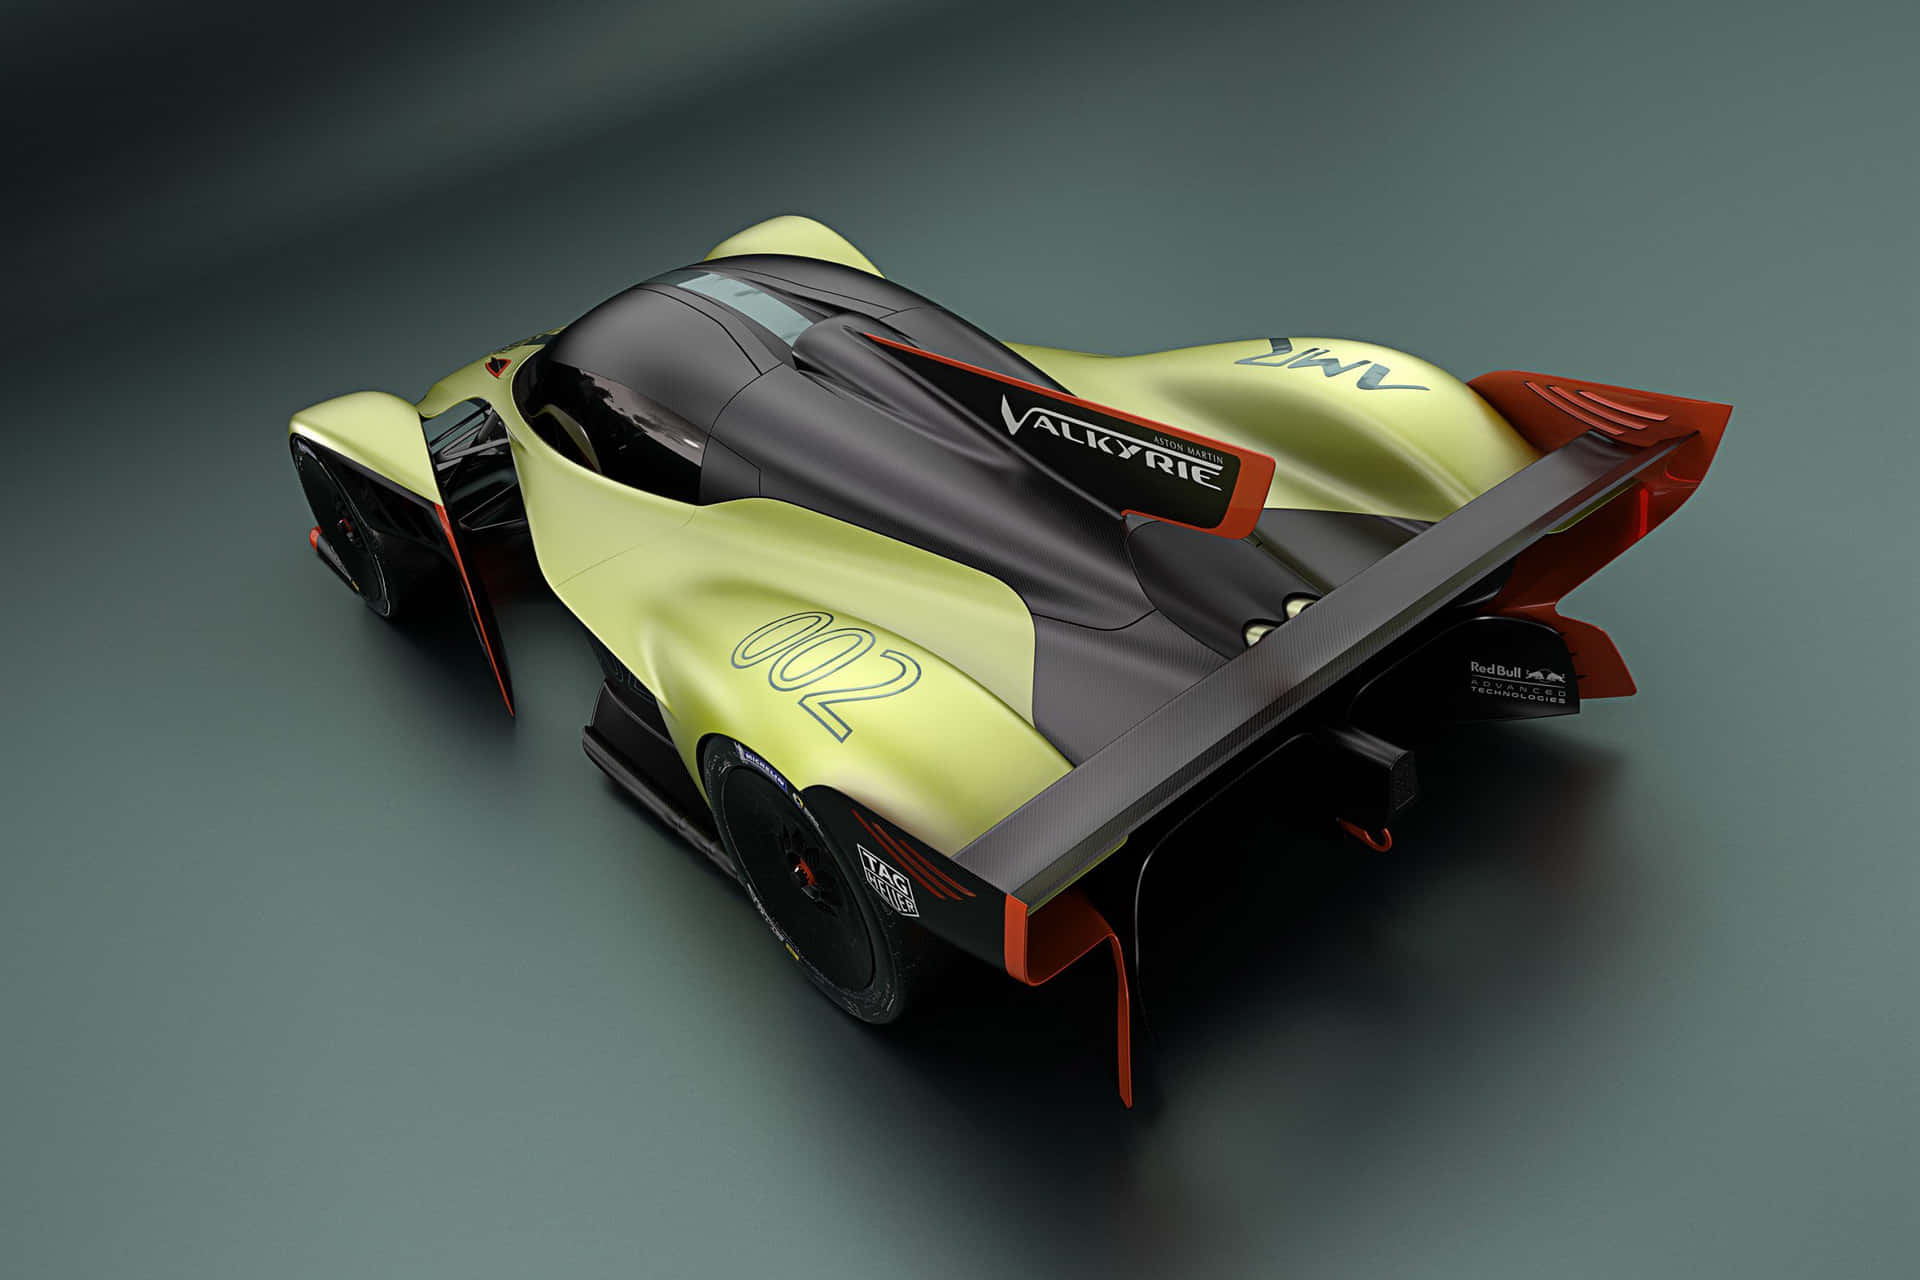 Aston Martin Valkyrie - Speed, Luxury, and Performance in One Striking Supercar Wallpaper